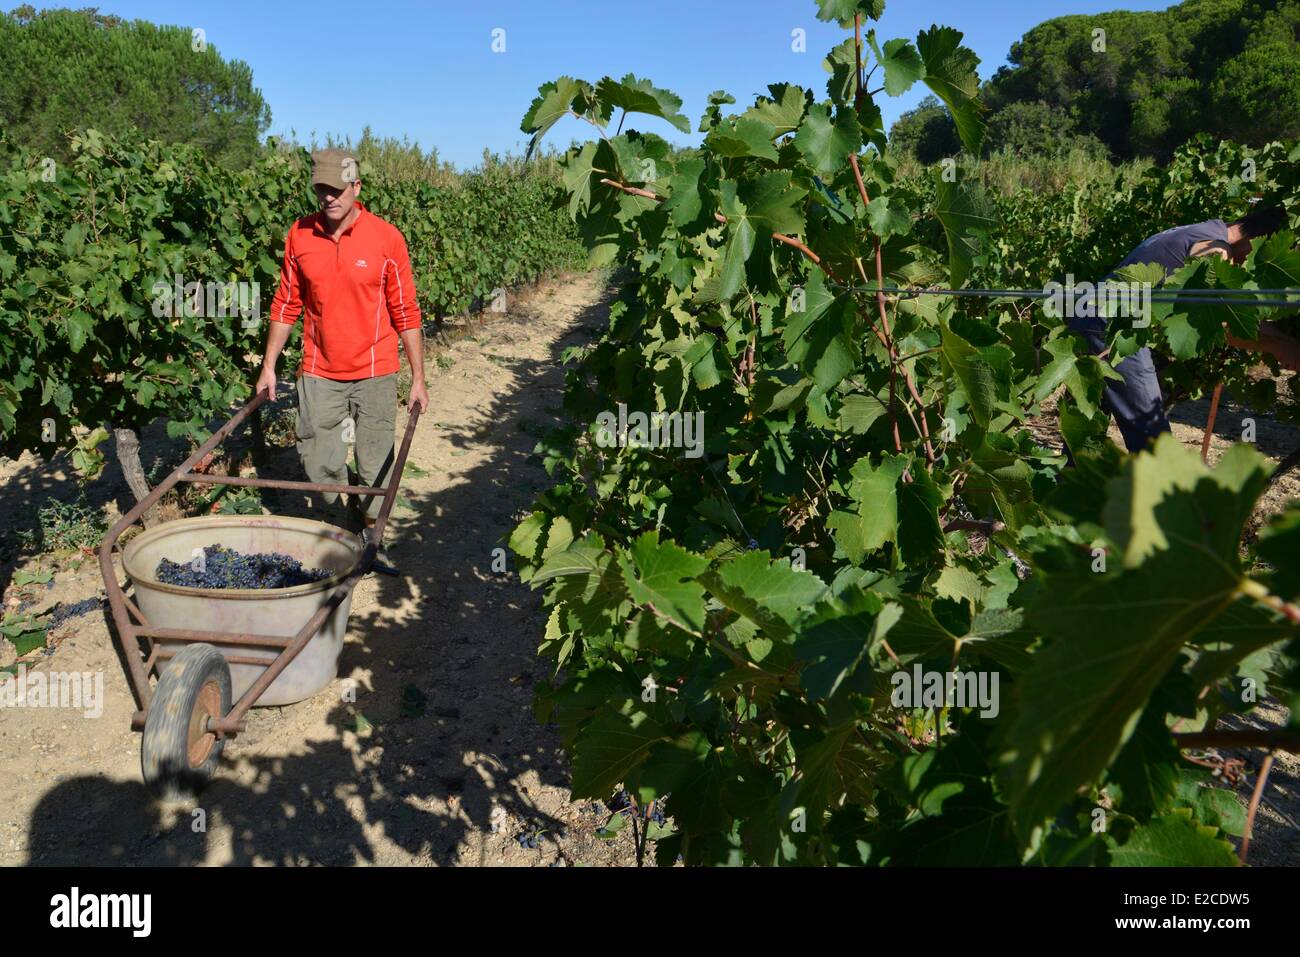 France, Herault, Boujan on Libron, organic vineyards of the Domain of the Ancienne Cordonnerie, the grape harvests manual workers, Yann Le Bouler grower Stock Photo